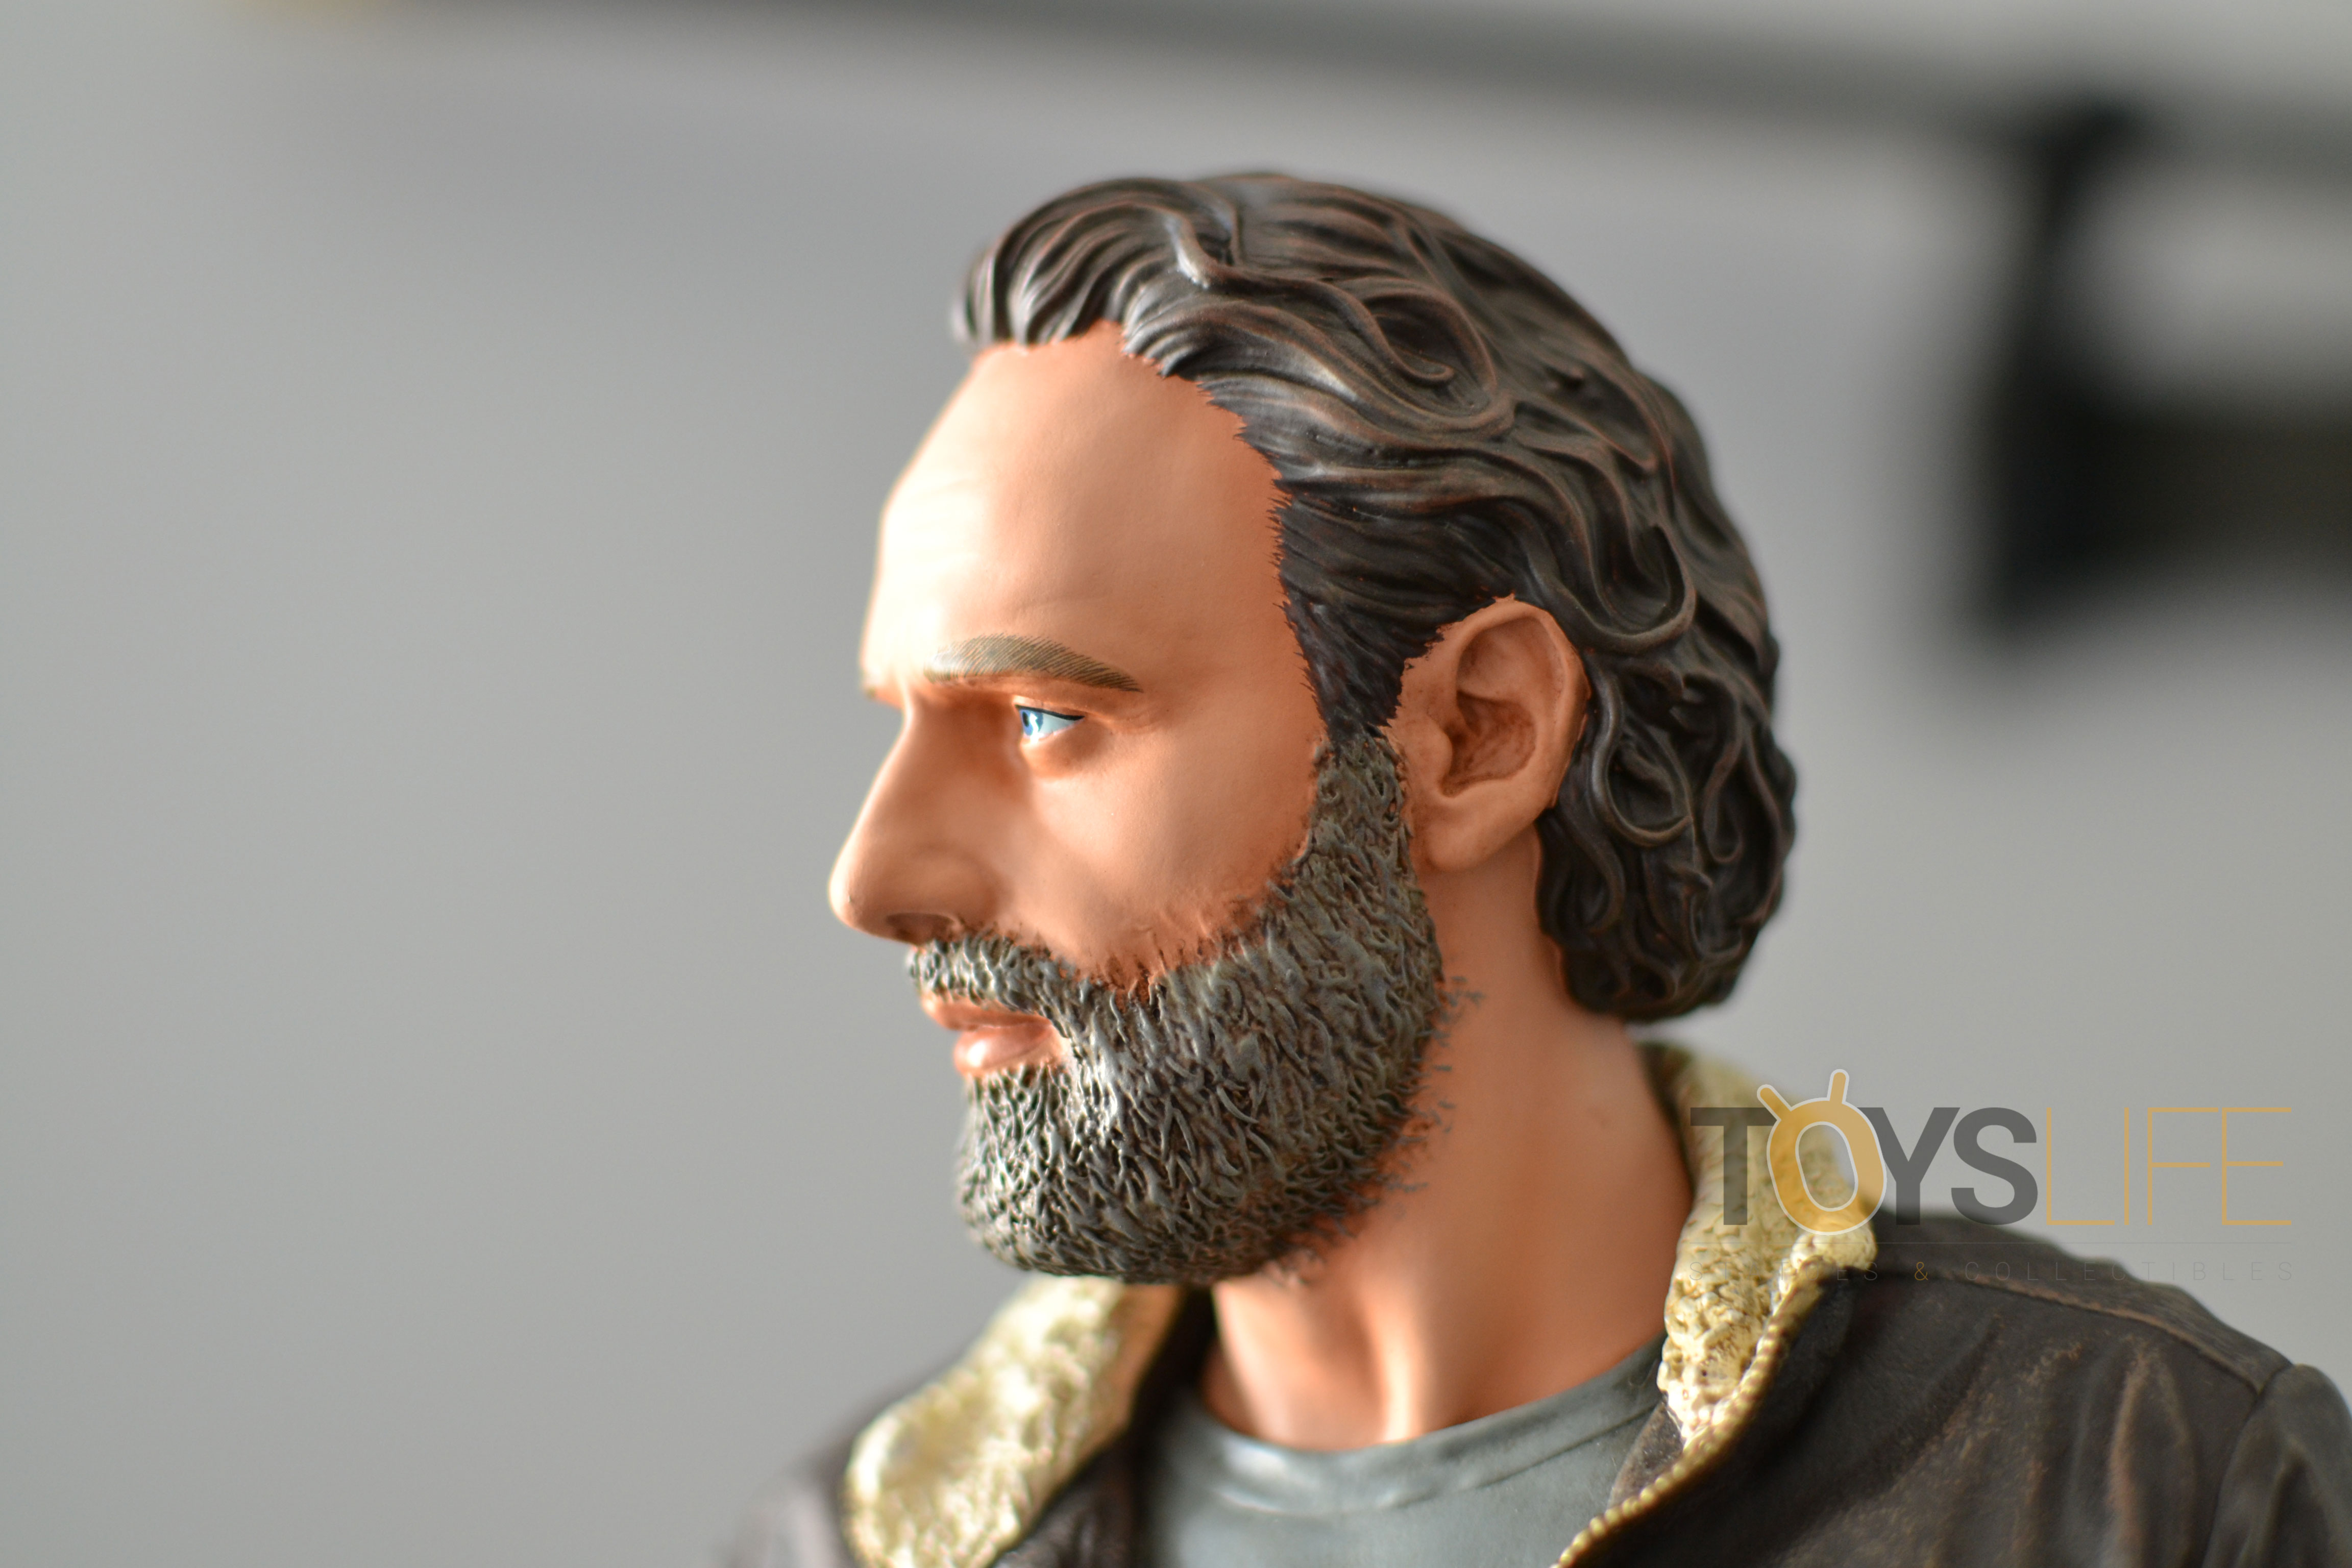 gentle-giant-the-walking-dead-rick-grimes-statue-toyslife-review-21